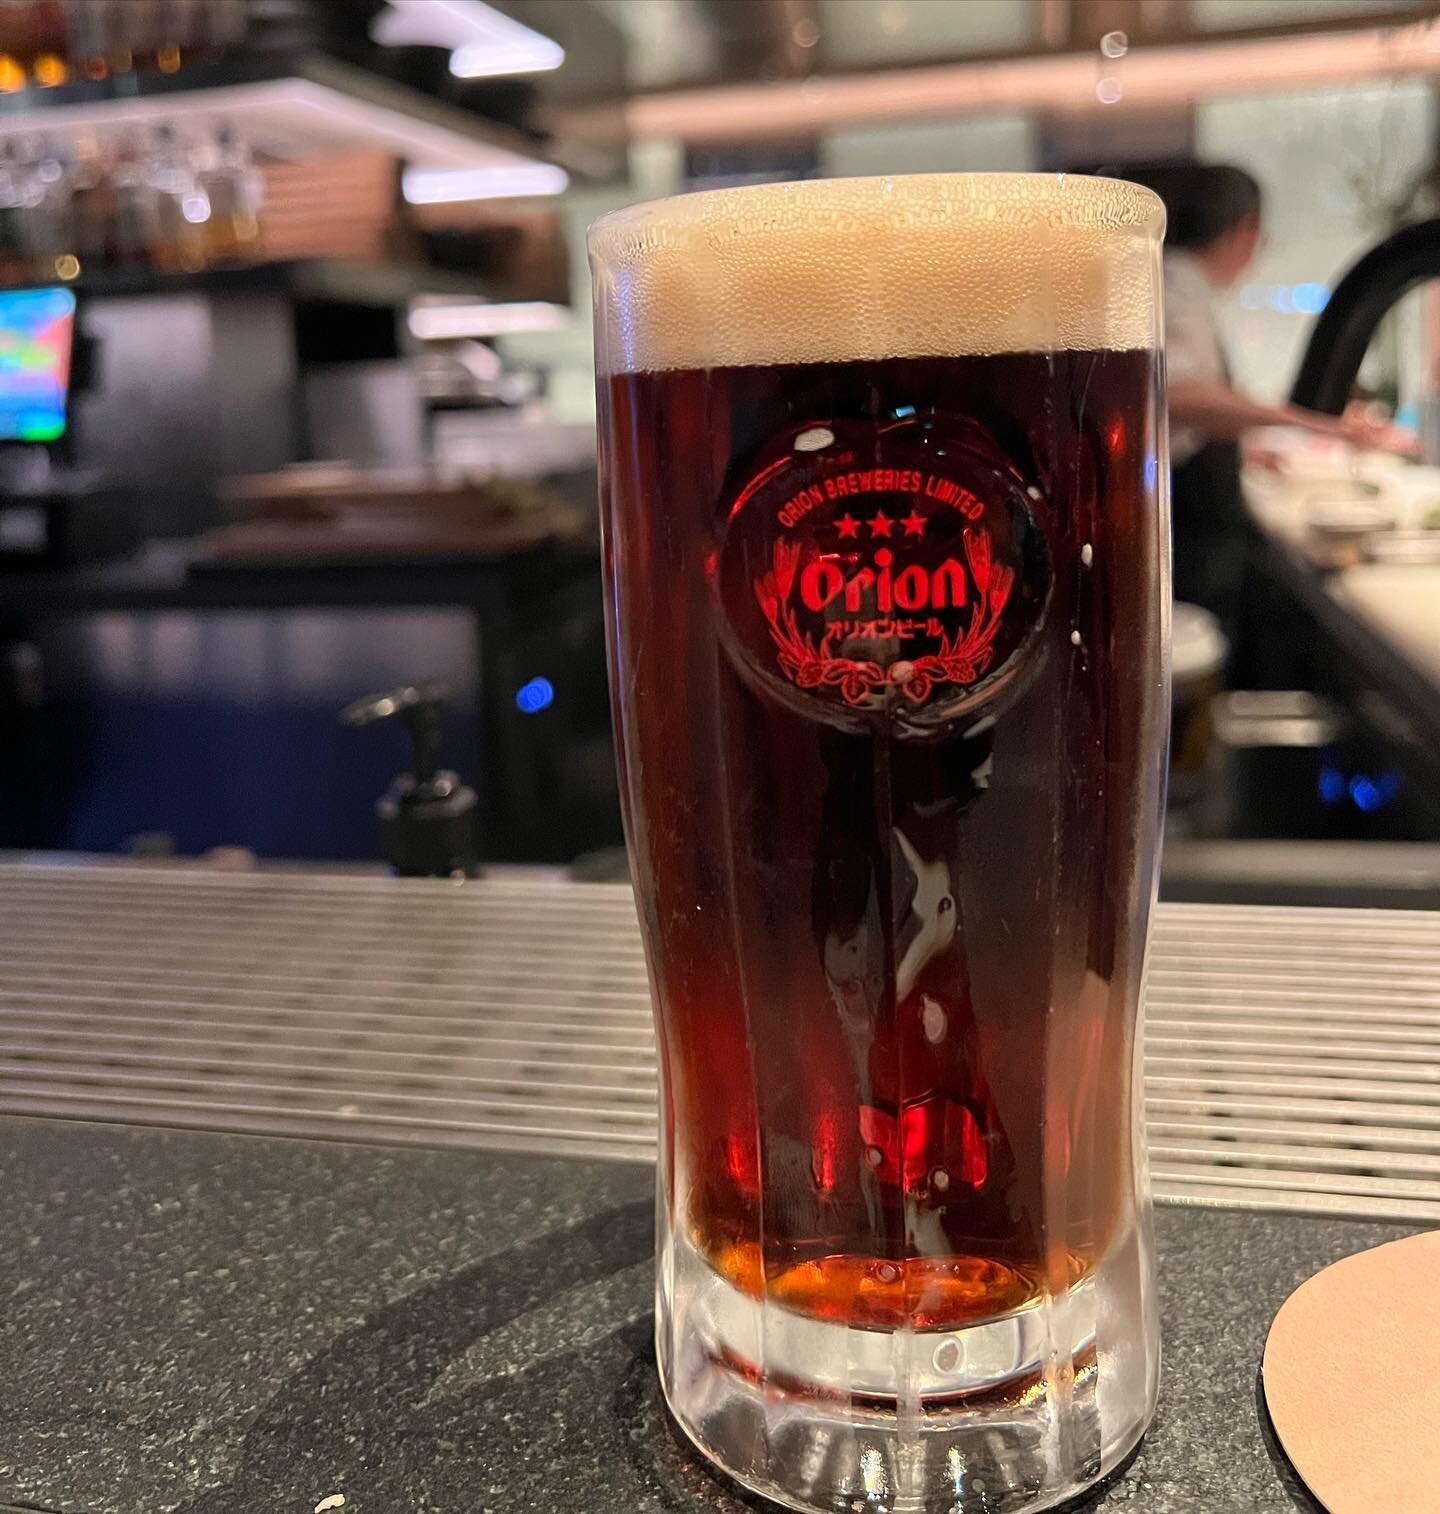 Orion the Dark is a surprisingly easy drinking and sessionable dark lager.
If you haven&rsquo;t tried already, let&rsquo;s give a try.
You&rsquo;ll love it🍻
#aebeerimports #aandebeerimports #orionthedark #darkbeer #japanesebeer #tapbeer #draftbeer #